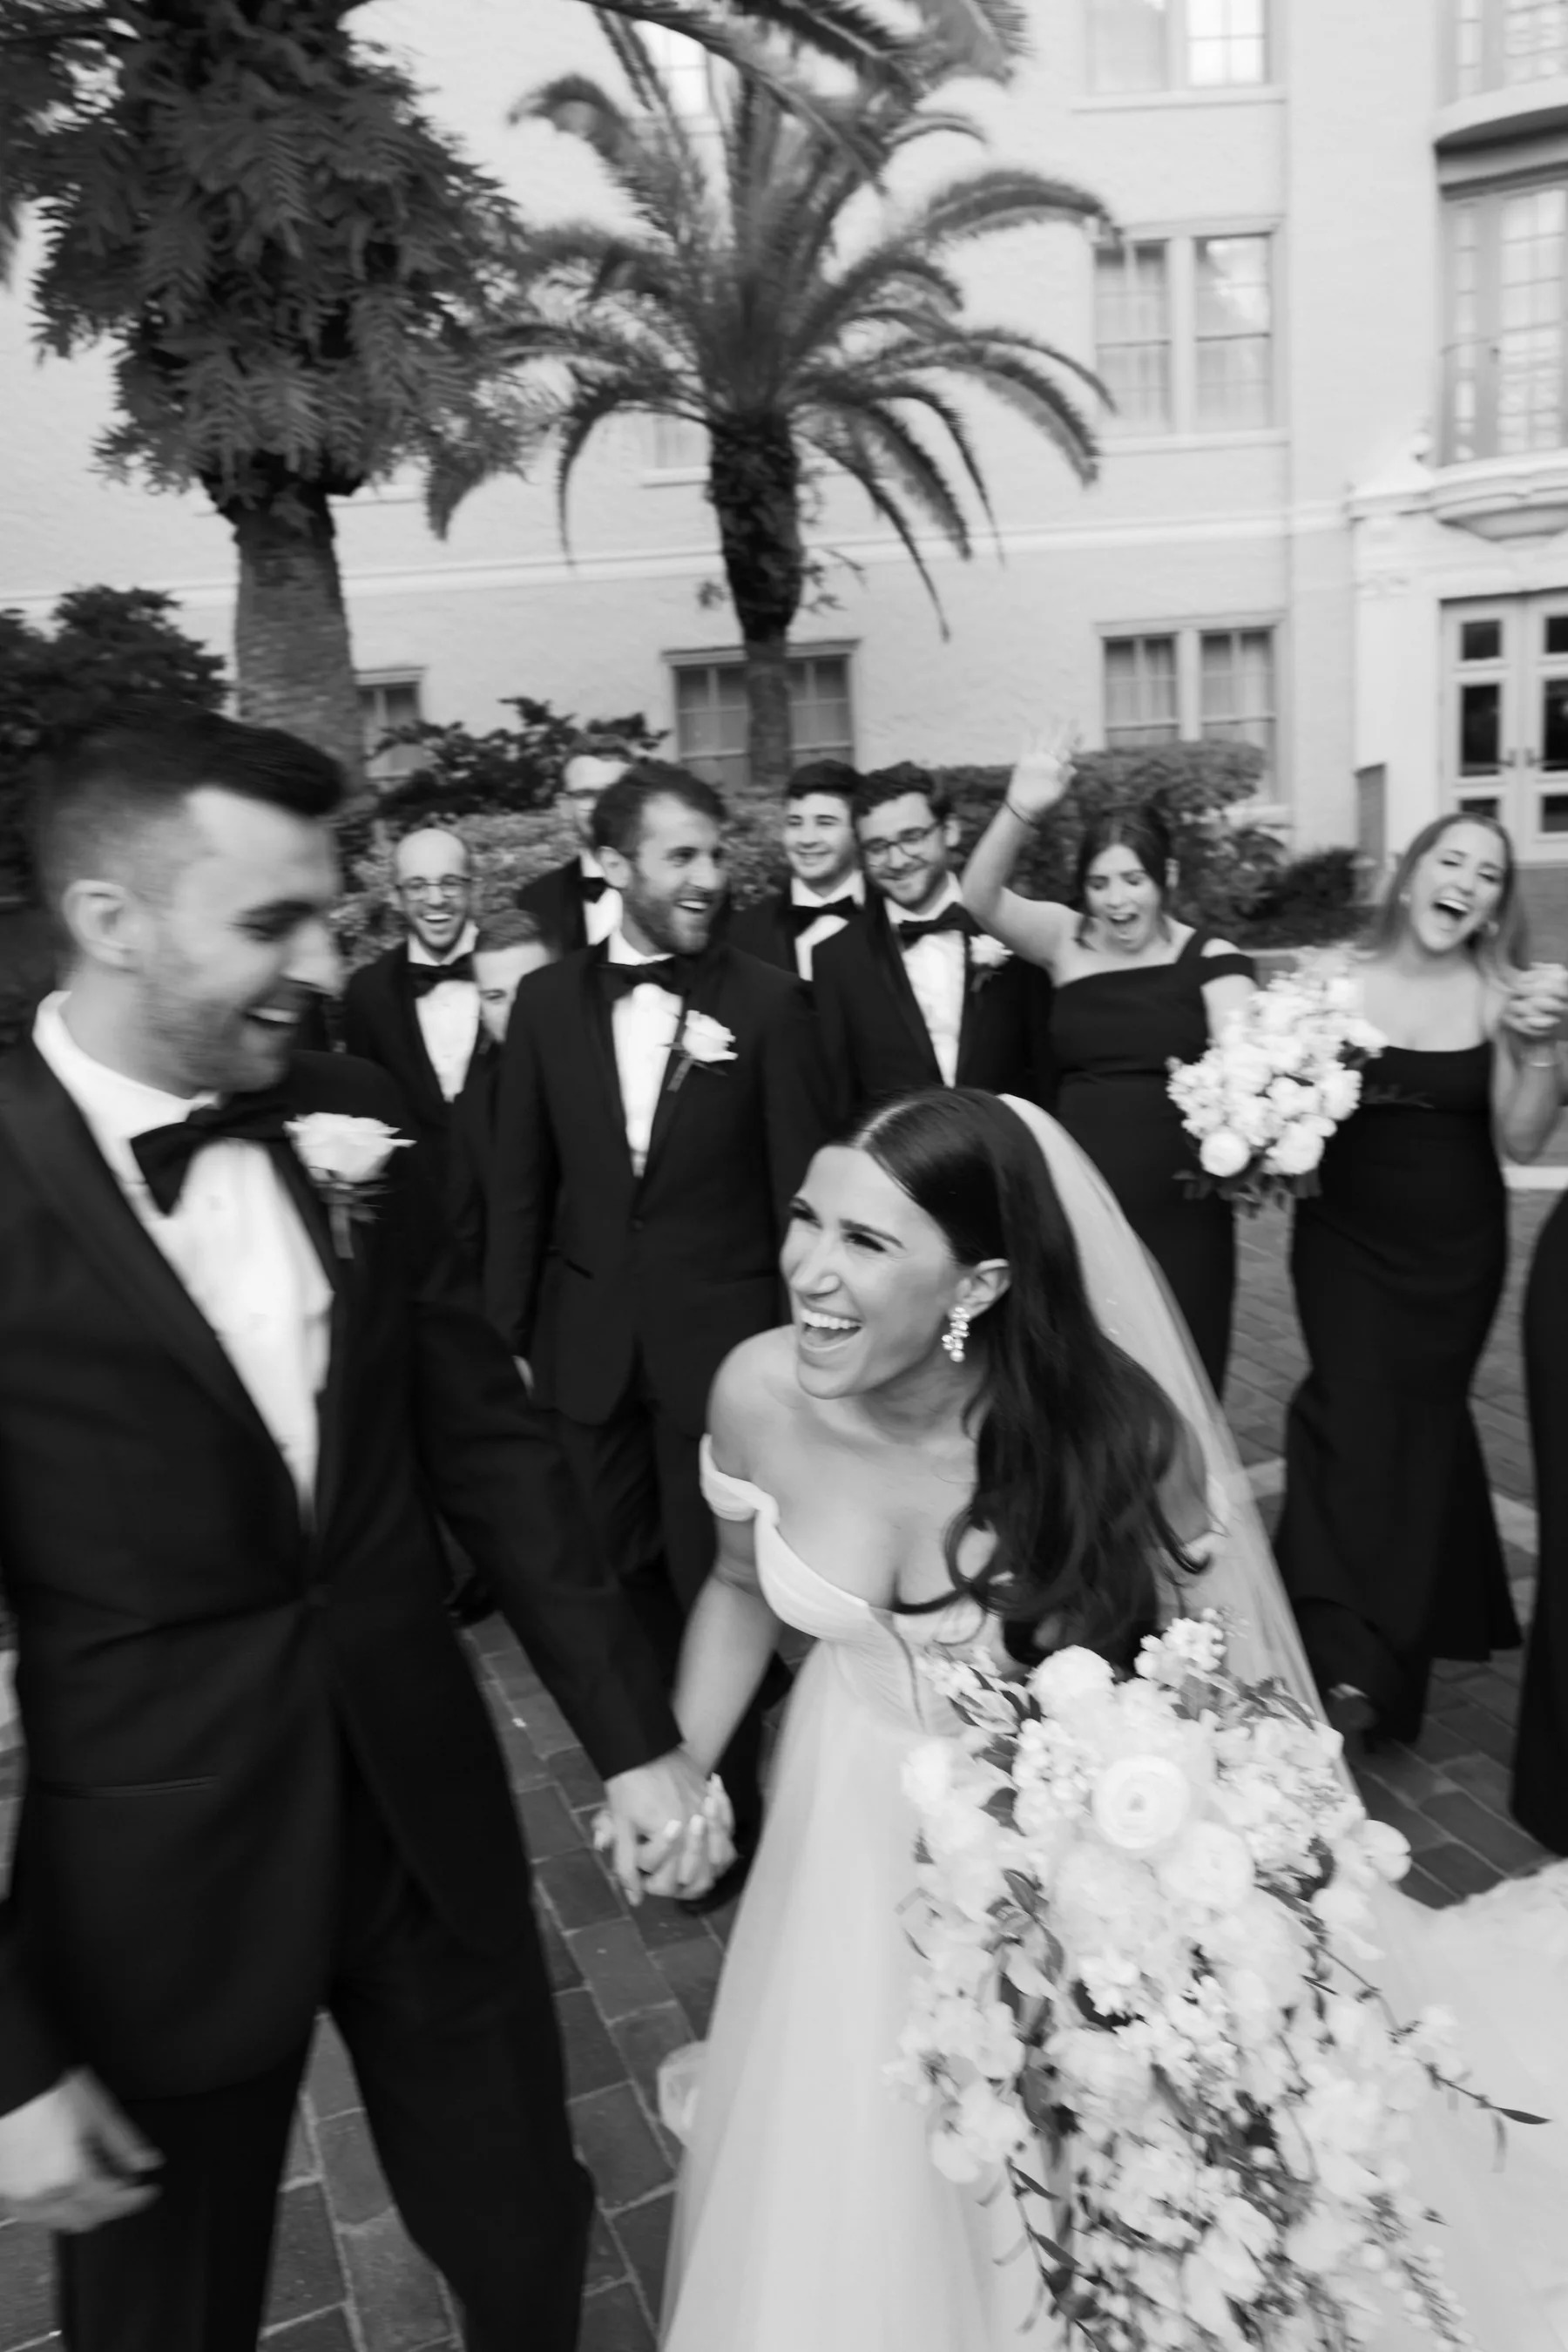 Bride and Groom Candid Black and White Wedding Portrait | Tampa Bay Photographer Dewitt For Love